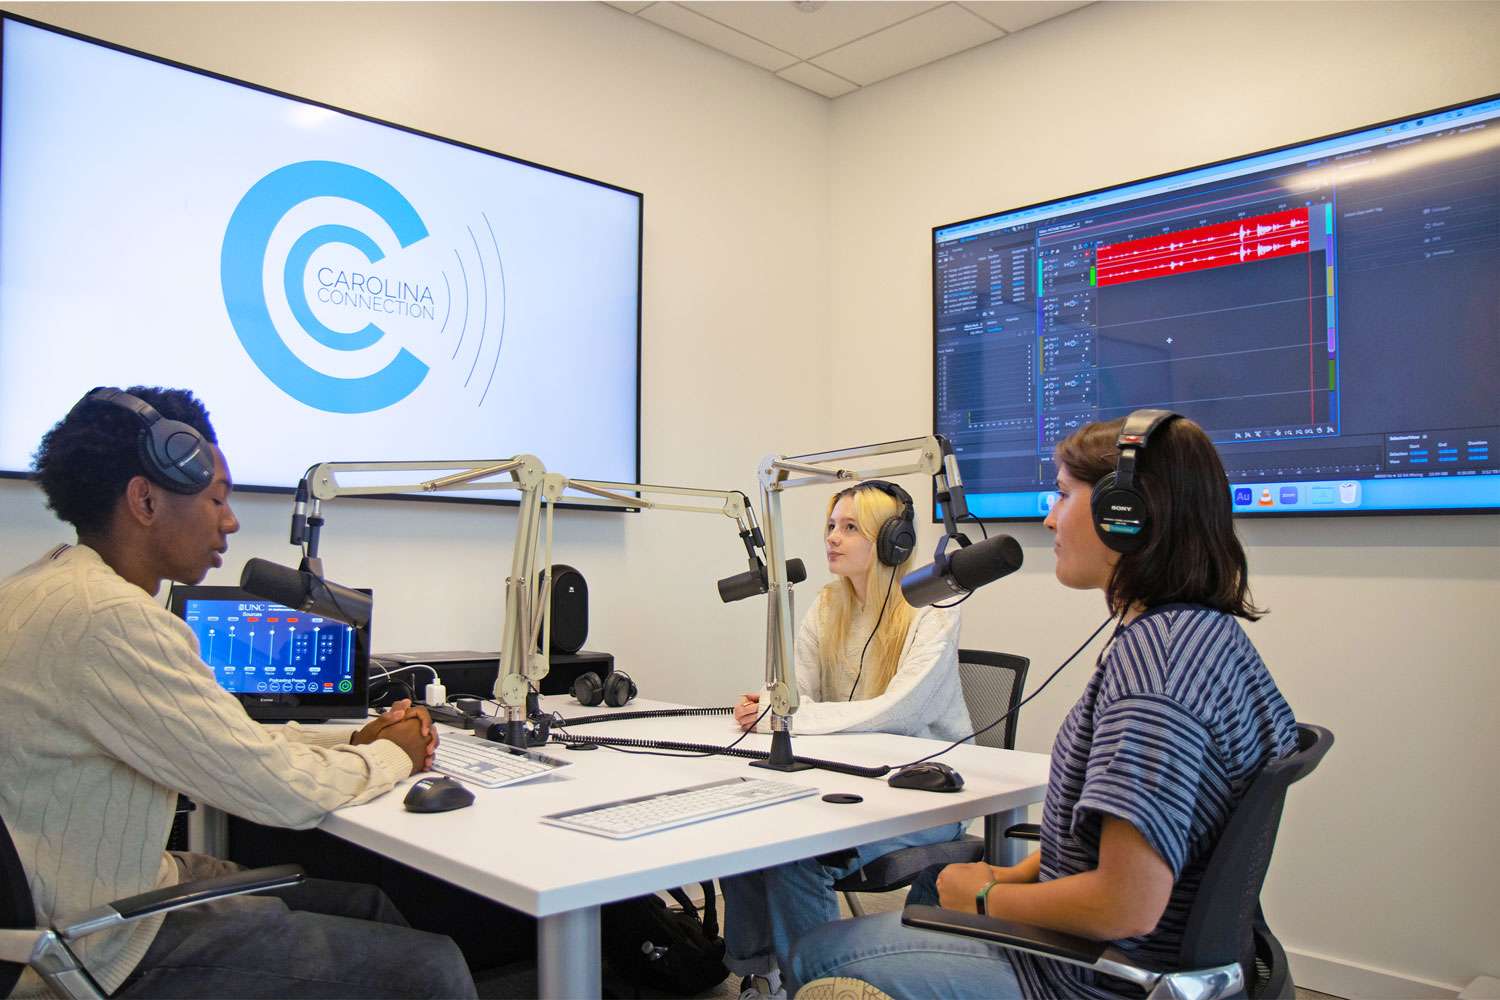 Podcast studio accommodates group discussions with mics and headphones for up to three people.